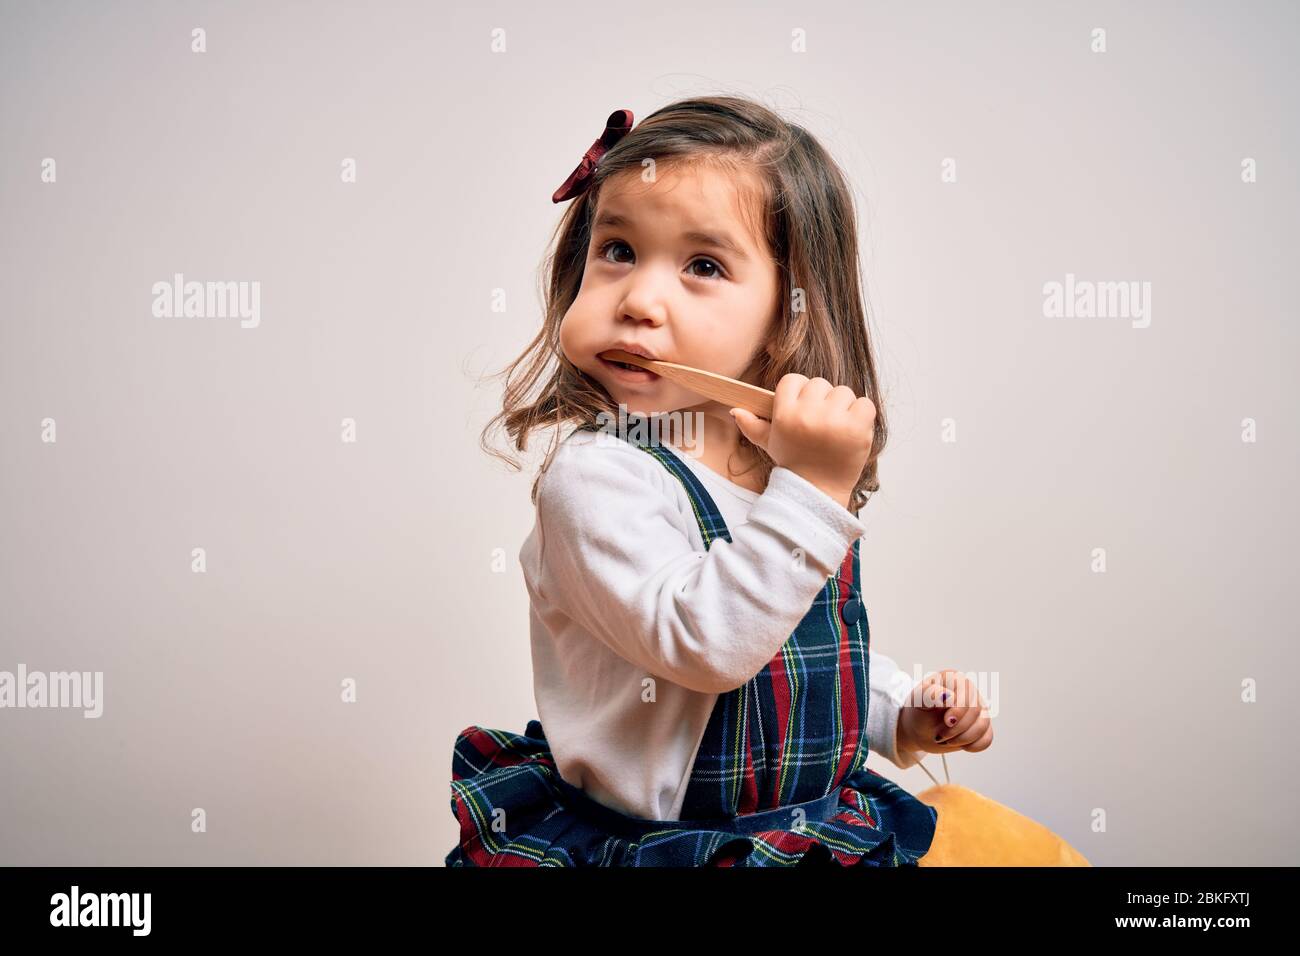 Young little infant girl brushing her teeth using tooth brush and oral paste, cleaning teeth and tongue as healthy health care morning routine. Learni Stock Photo